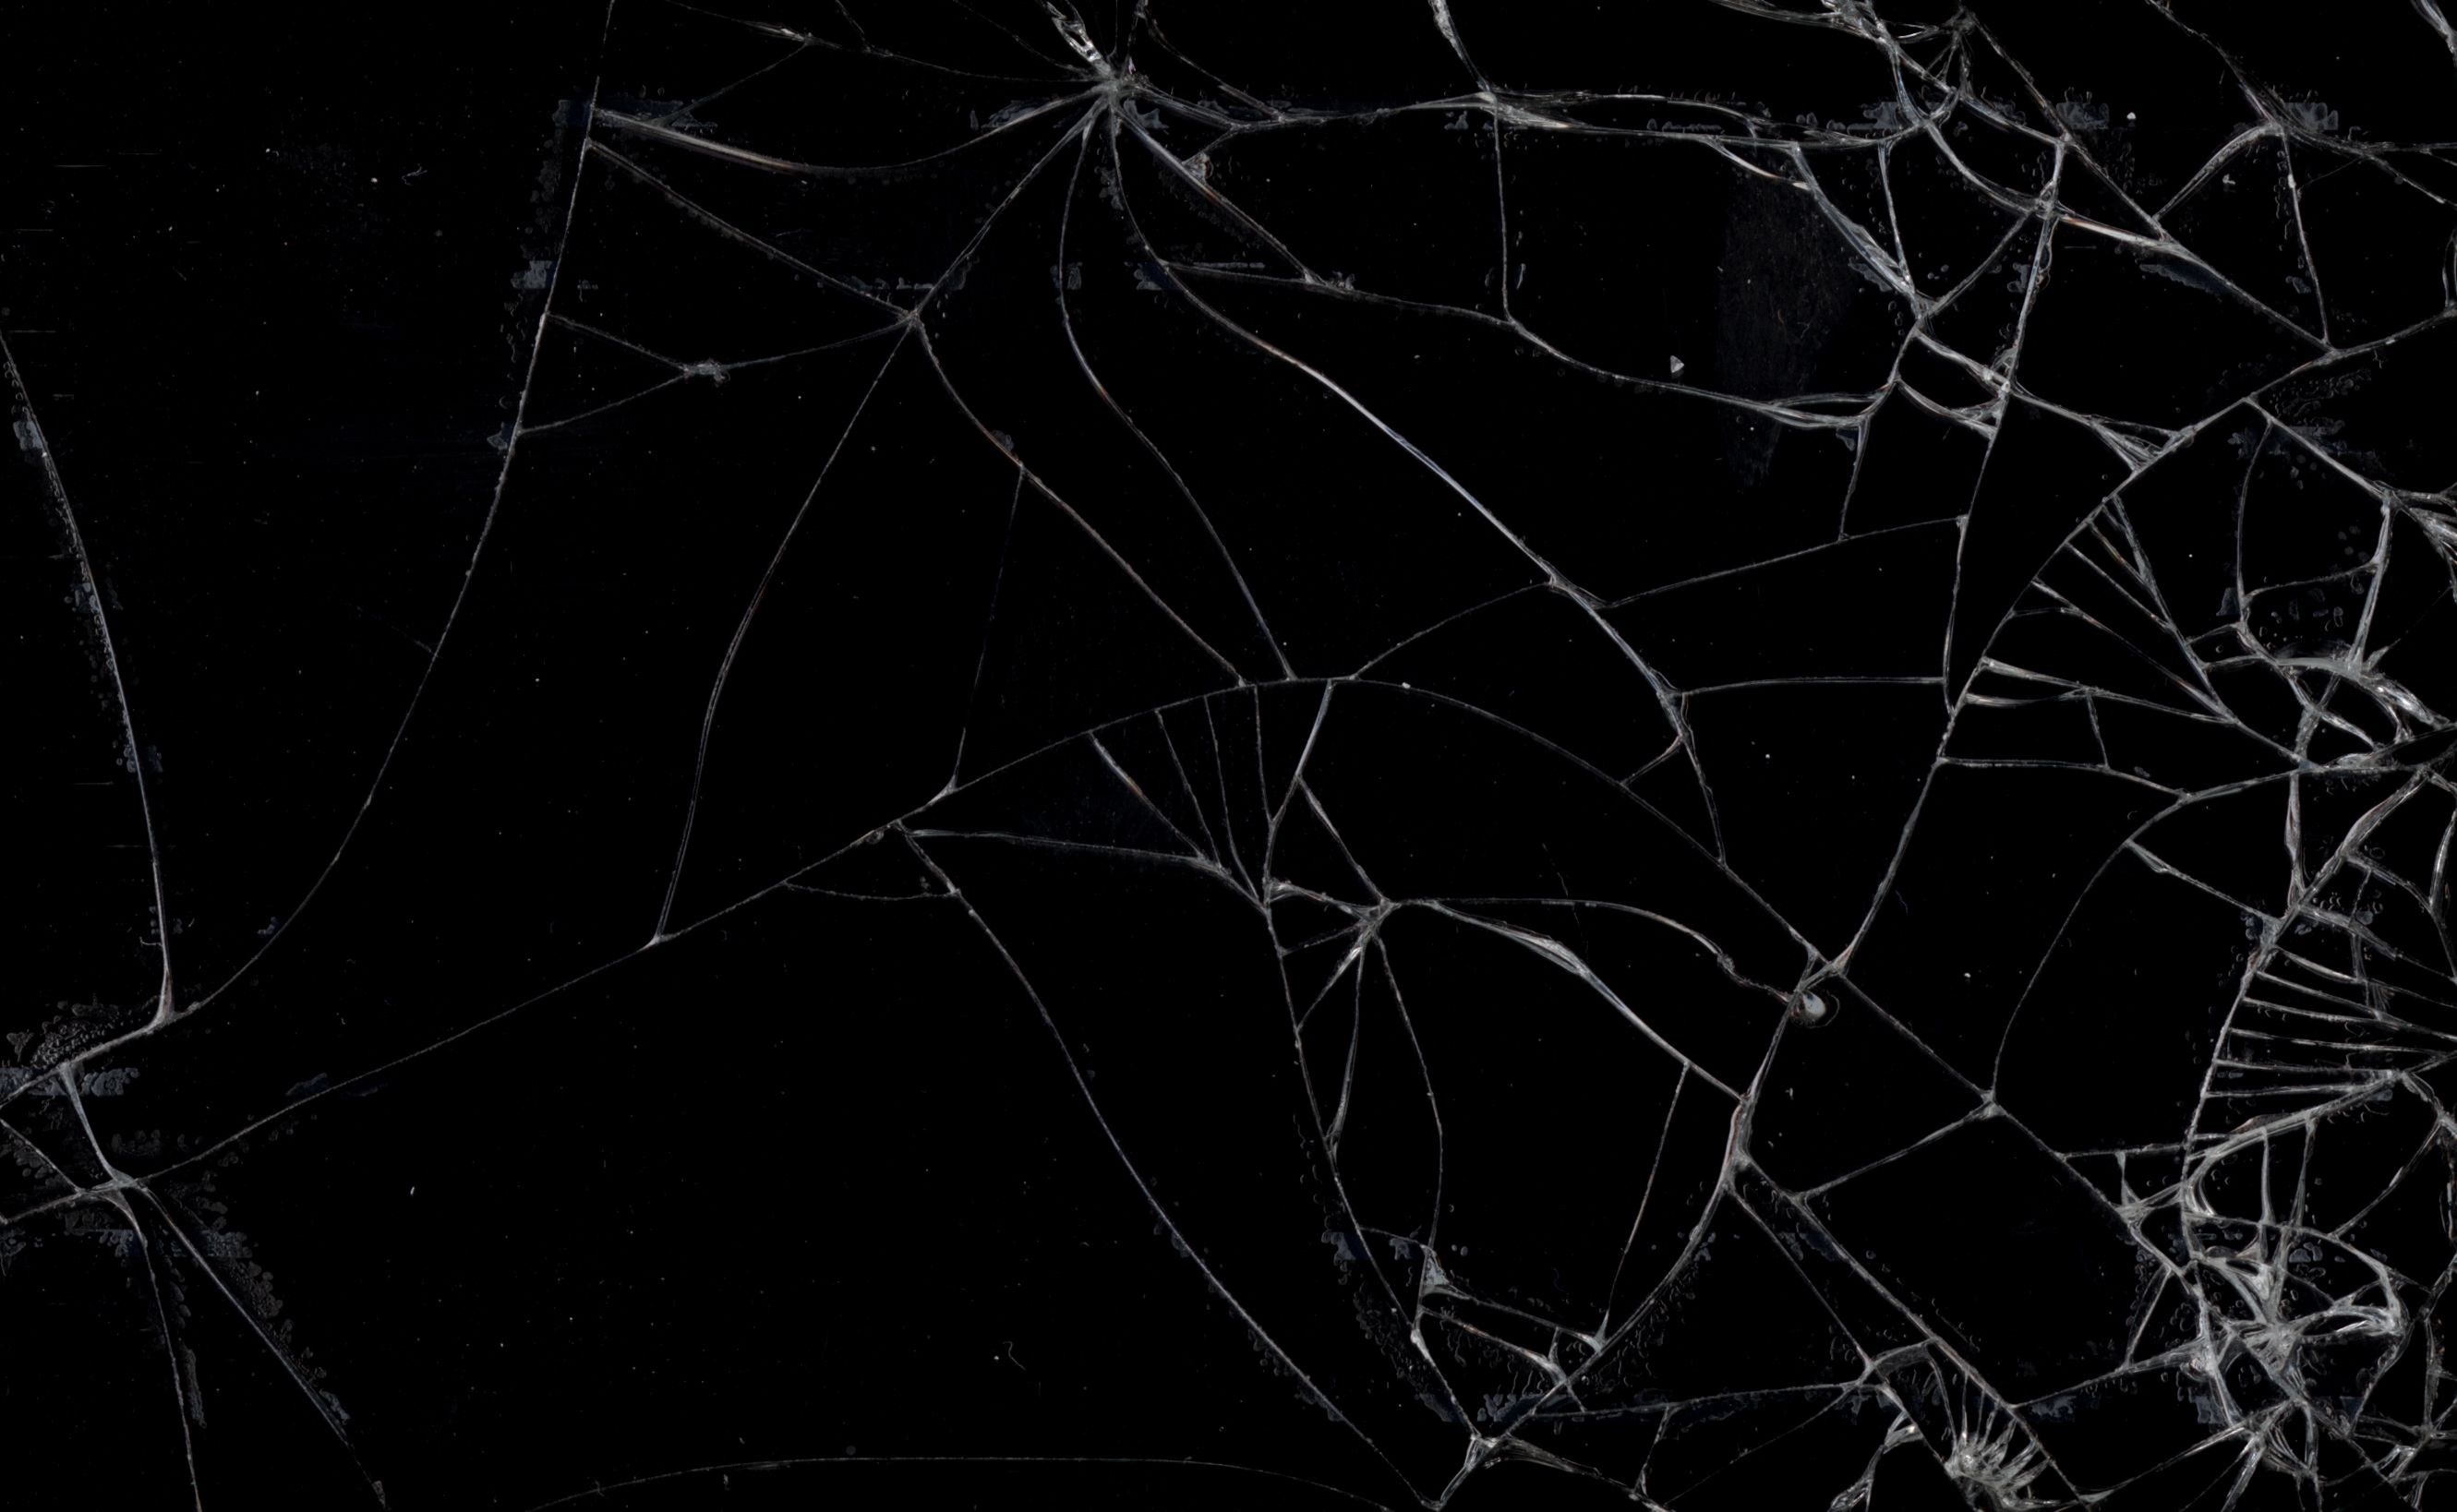 glass-shattered-broken-cracked-1-texture-by-aaron-pate.jpg (2661 ...